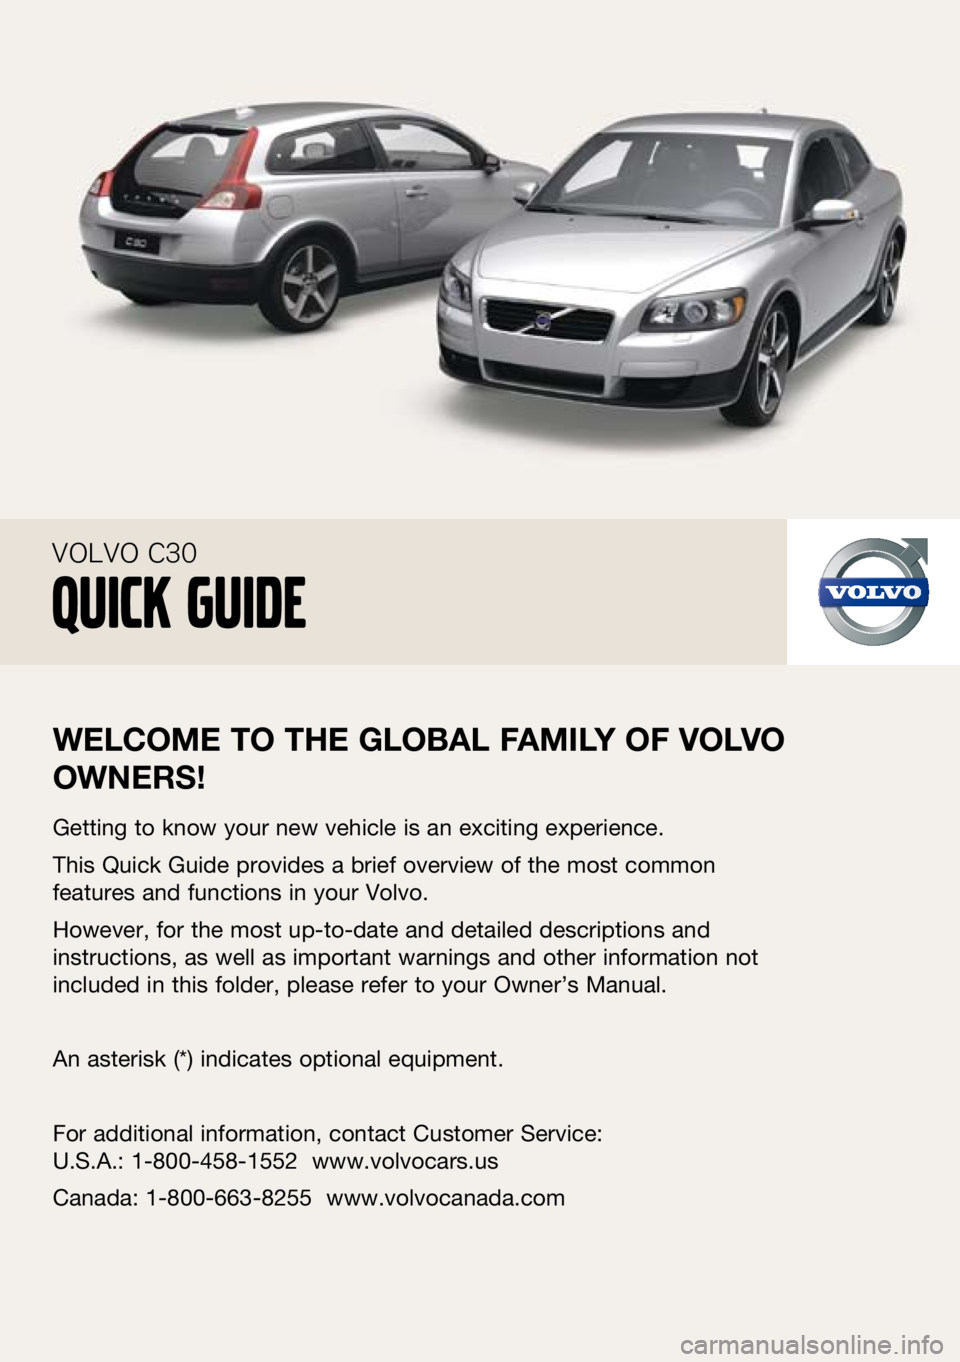 VOLVO C30 2010  Quick Guide 
 
welcome to the  global F amily oF  volvo 
owner S!
getting to know your new vehicle is an exciting experience.
This Quick  guide provides a brief overview of the most common 
features and functions